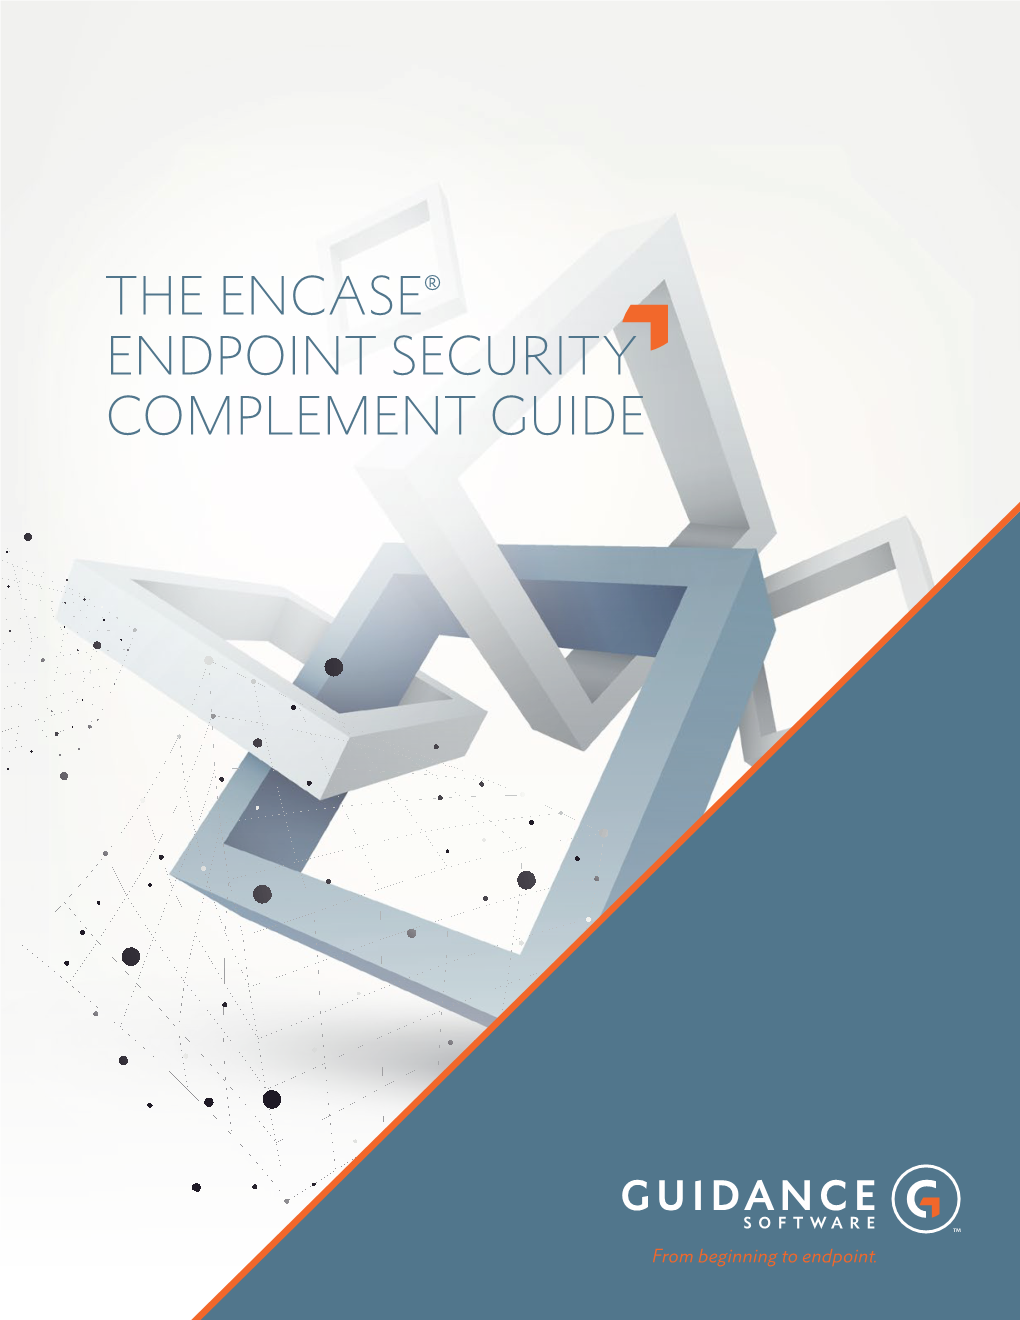 The Encase® Endpoint Security Complement Guide